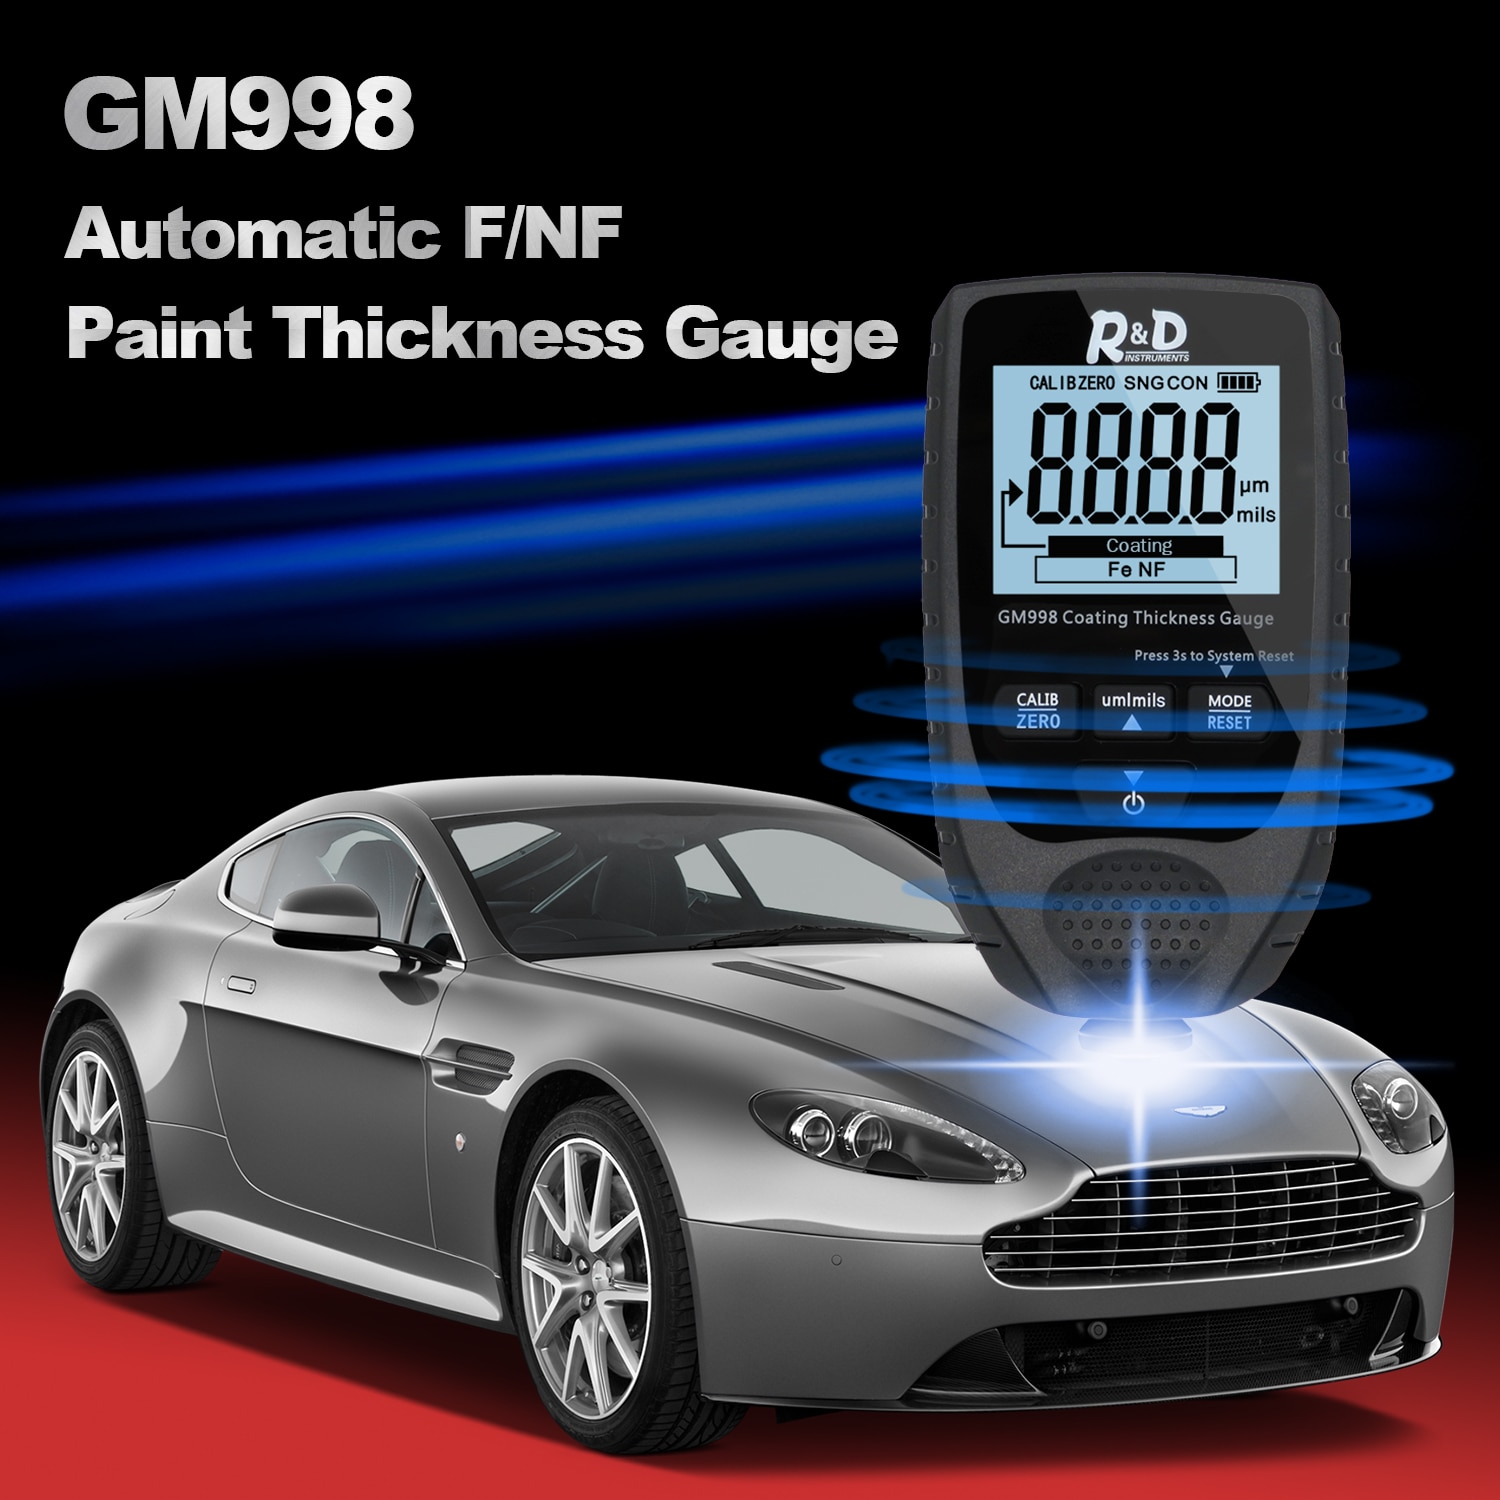 GM998 Car Paint Coating Thickness Gauge electroplate metal coating thickness tester meter 0-1500um Fe & NFe probe